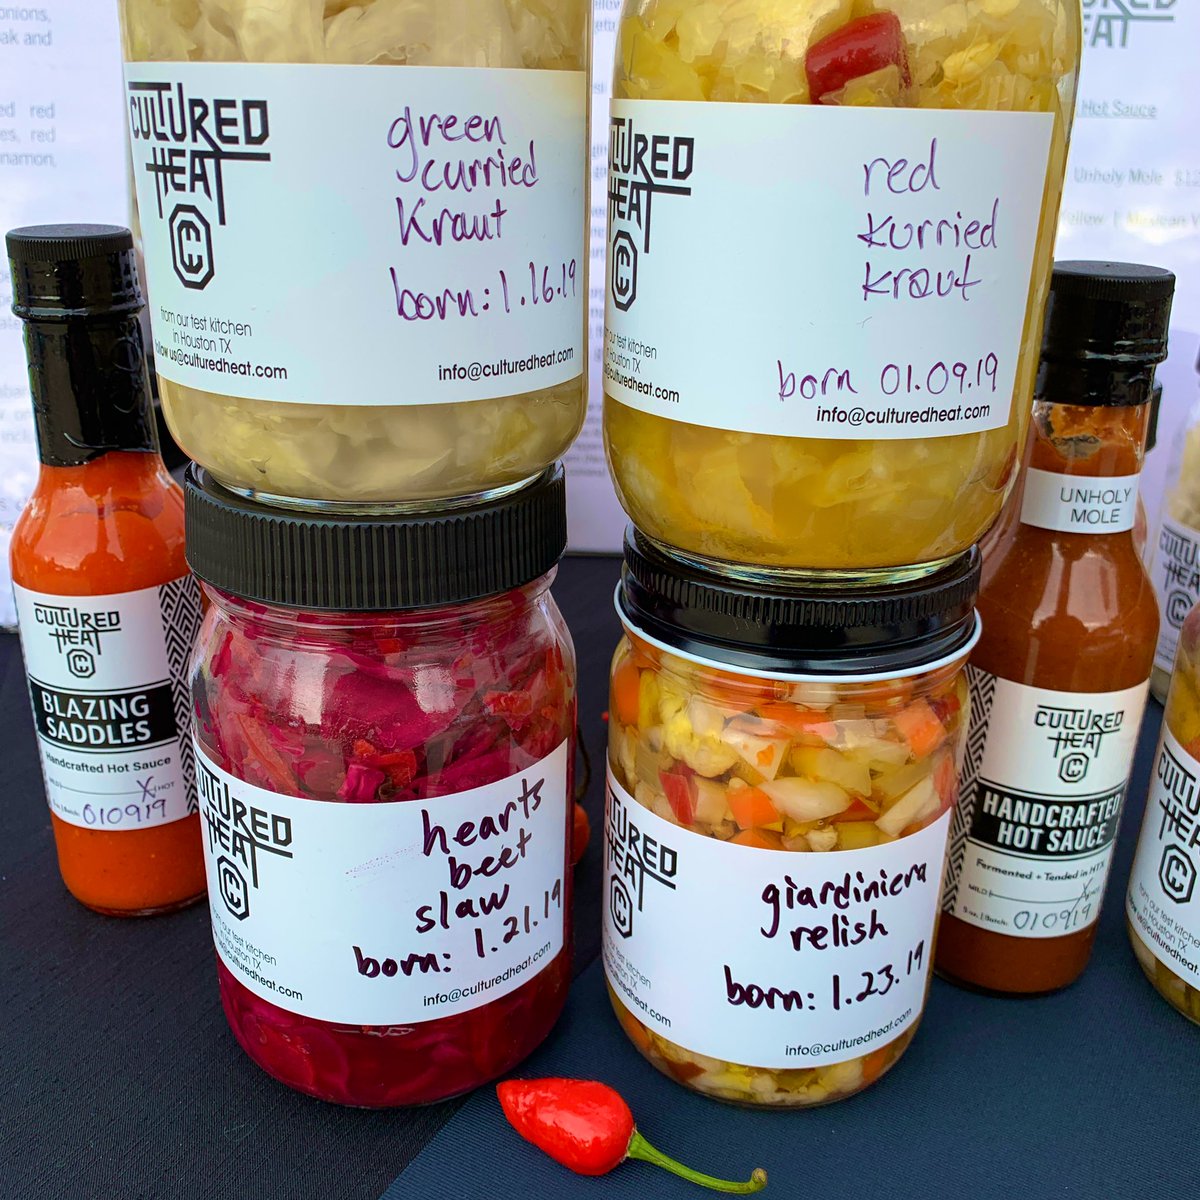 We’re back in @GalvestonIsland with some favorites we haven’t had for a while like #Giardiniera relish and our new #fermentedfood #HeartsBeetSlaw 
Come make your #guthappy with #probiotic rich goodness!
*
 #fermentation #picklinglife #livefood #guthealth #feedyourgut #microbiome